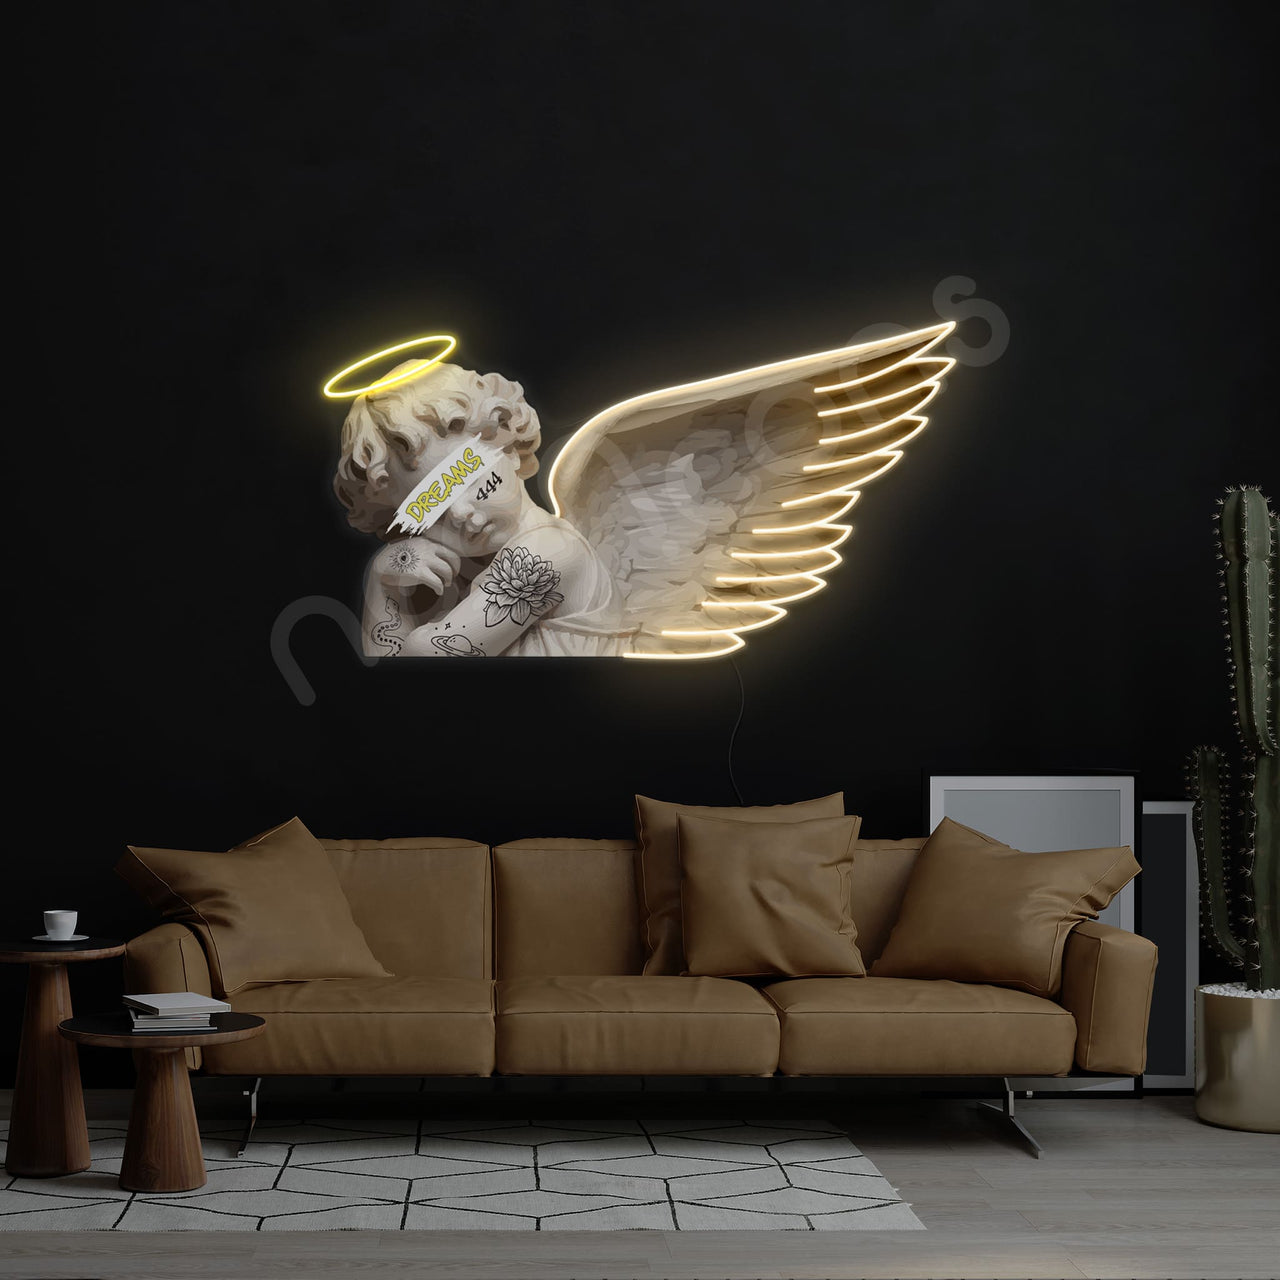 "Winging it" LED Neon x Acrylic Artwork by Neon Icons